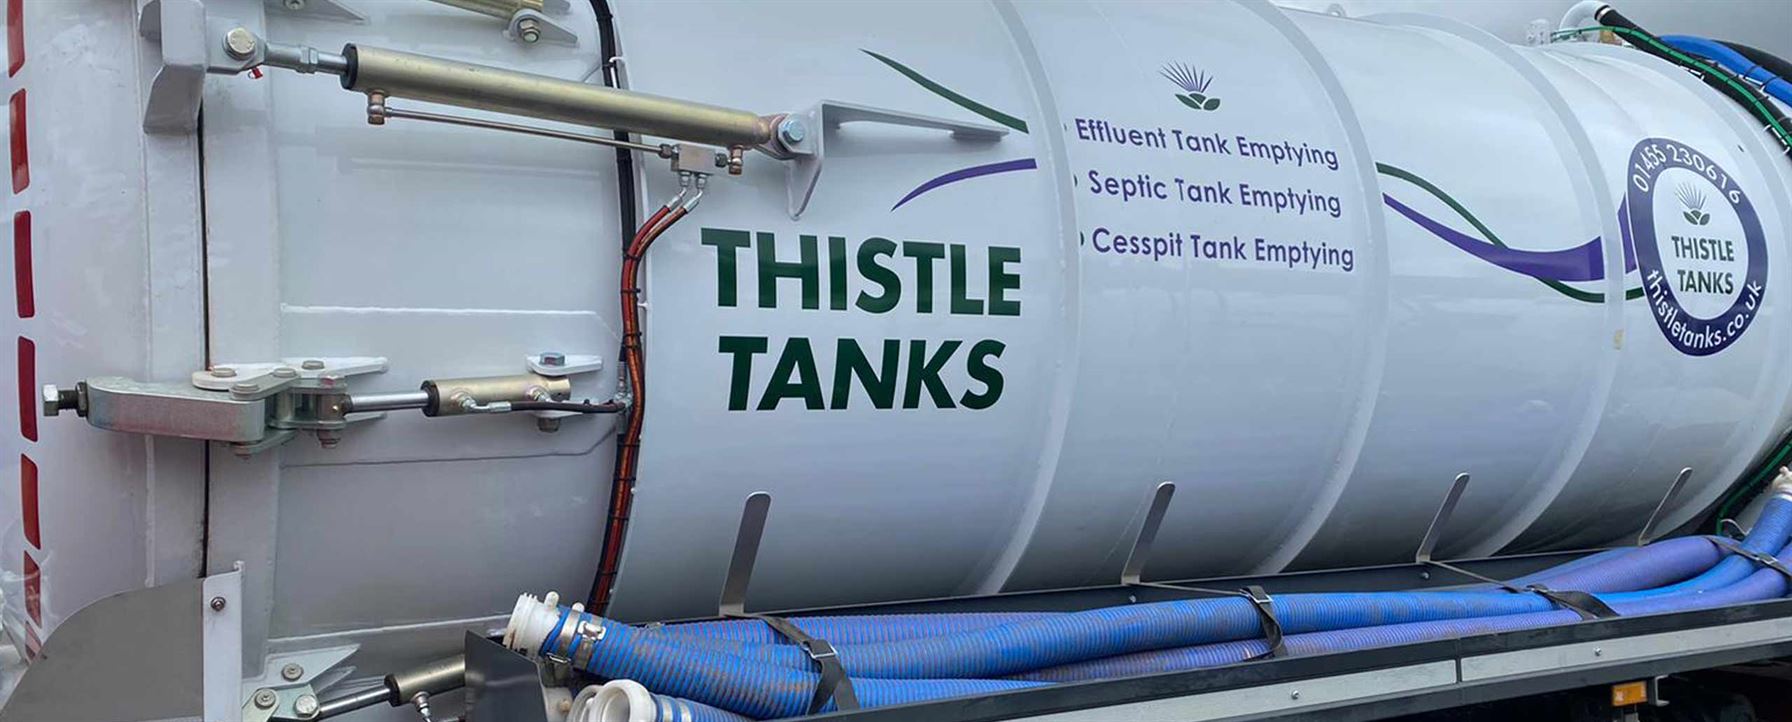 vacuum truck showing Thistle Tanks logo and services on the side